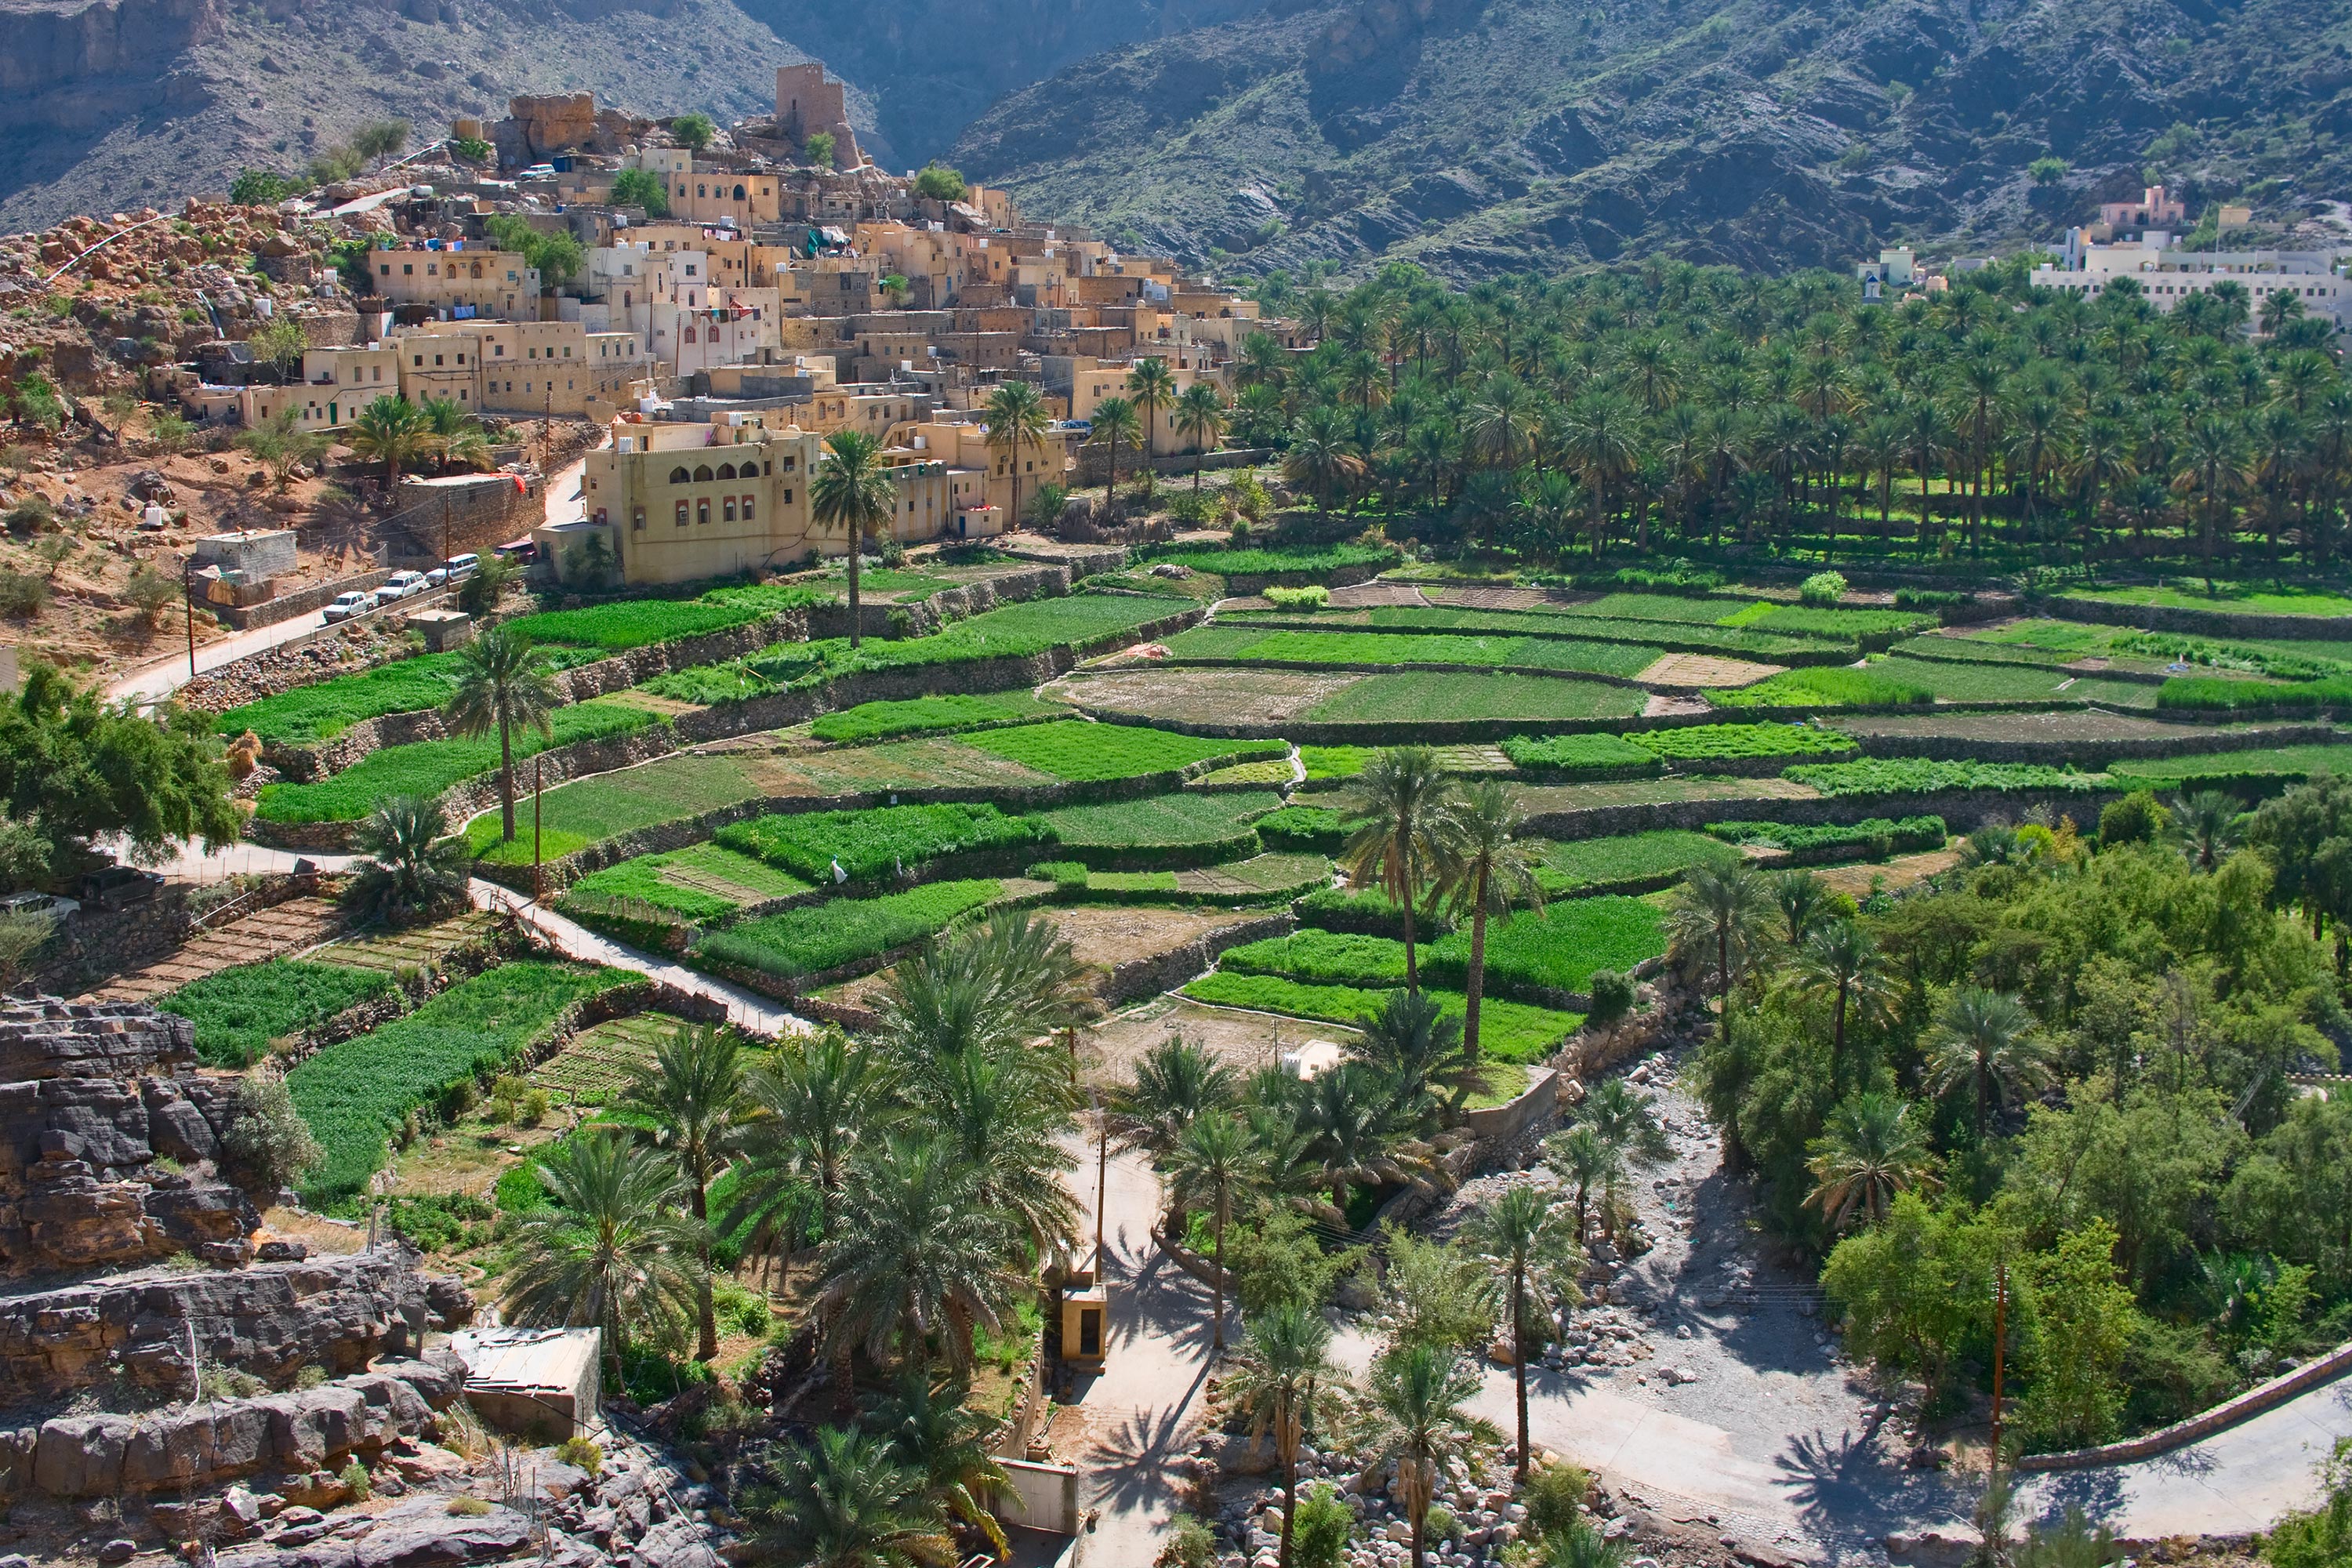 Cultivated area in Oman has increased